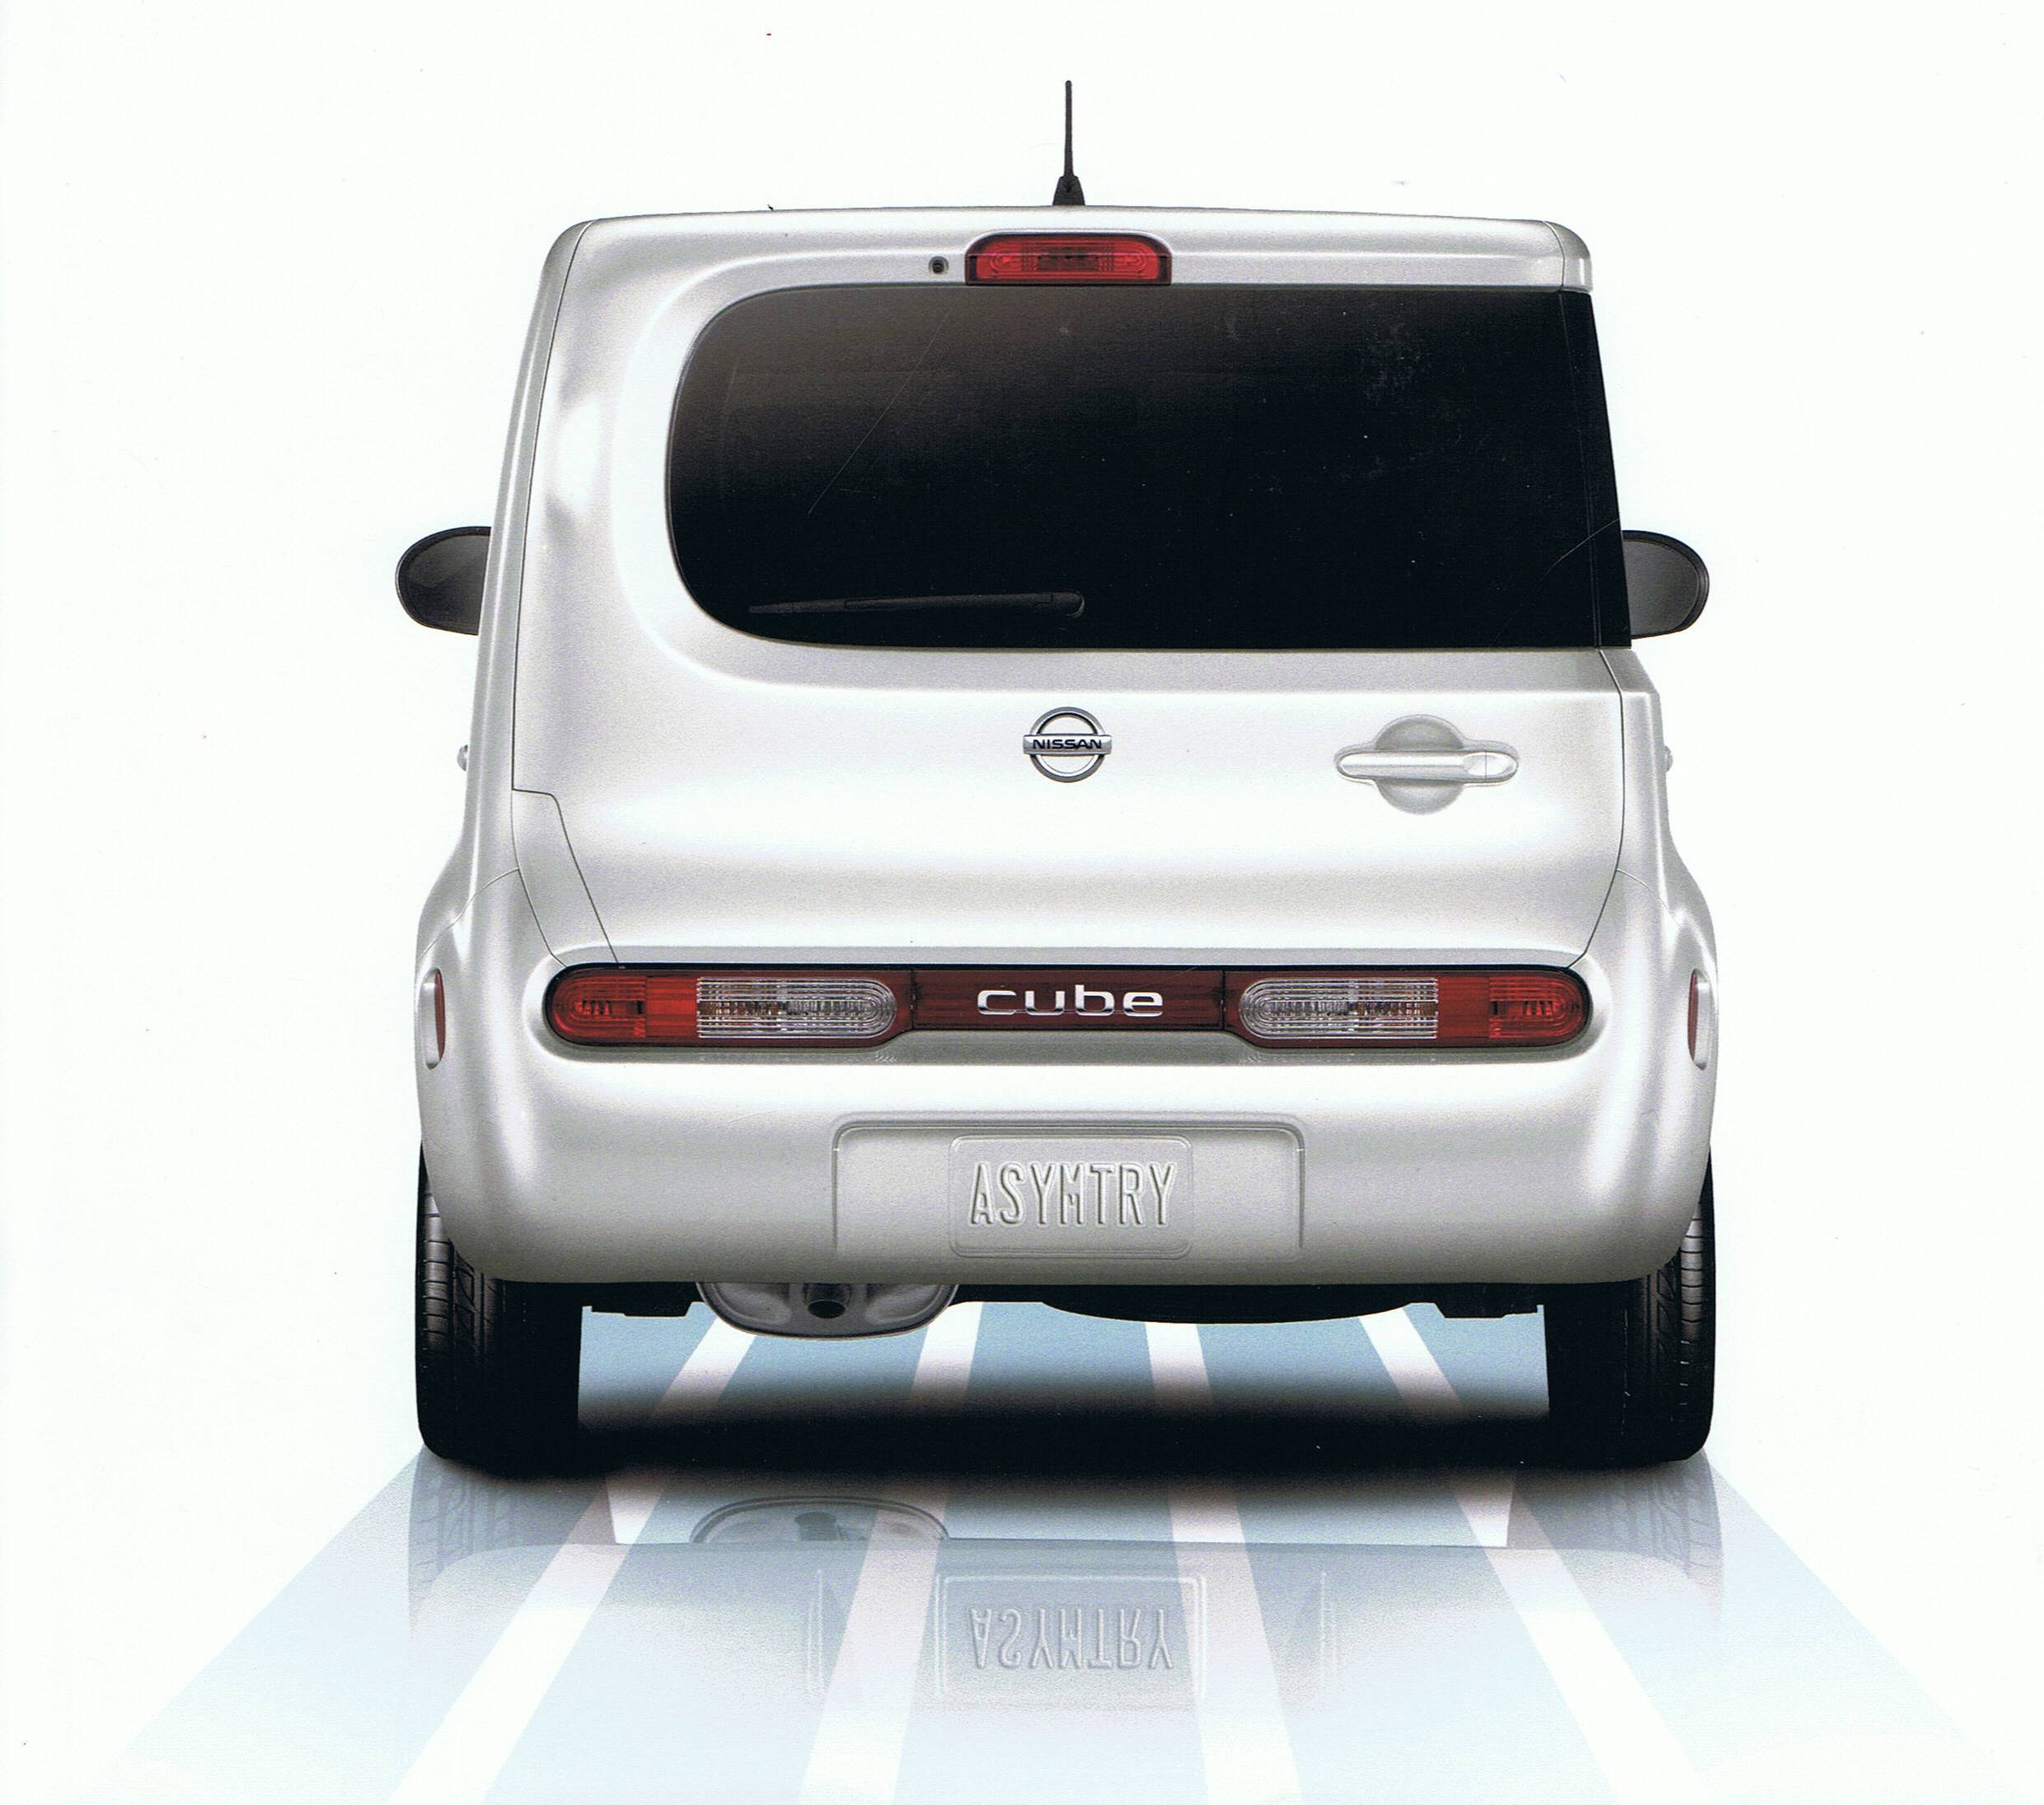 2009 Nissan CUBE review